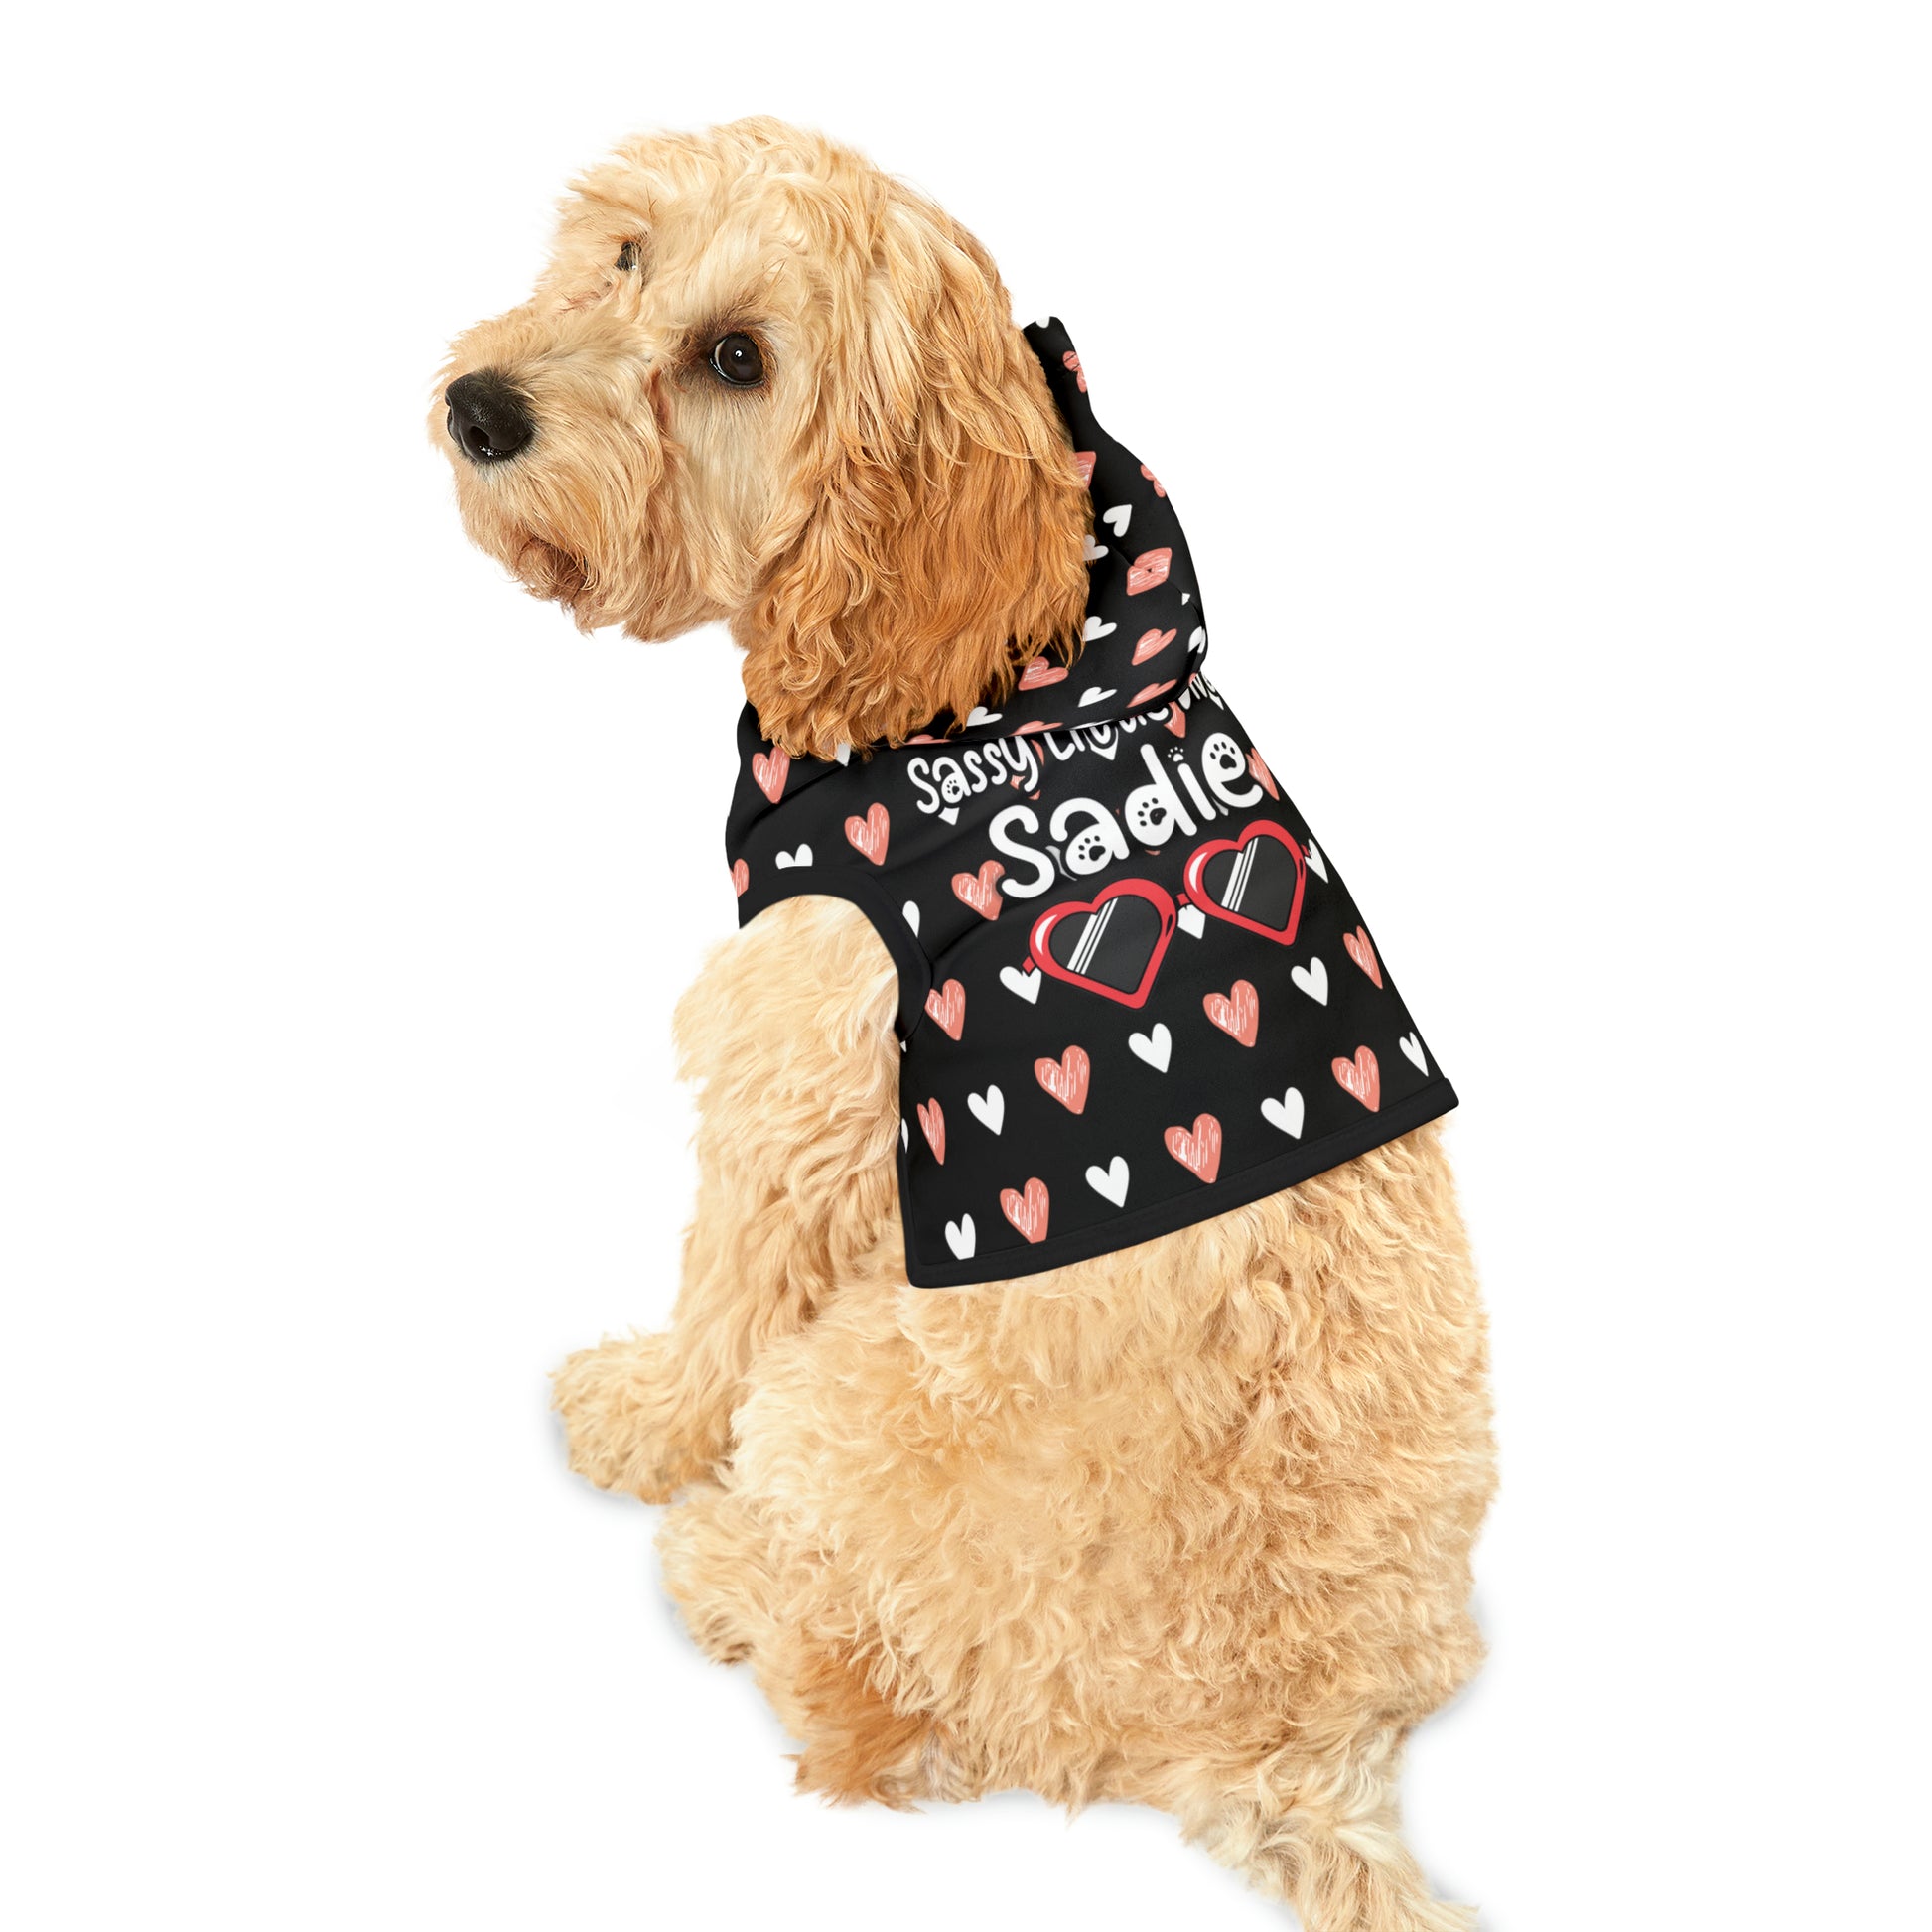 a cute dog wearing a pet hoodie. The pet hoodie has a beautiful hearts pattern design with a message that says: "Little Diva Sadie" and sun glasses. Hoodie's Color is black 